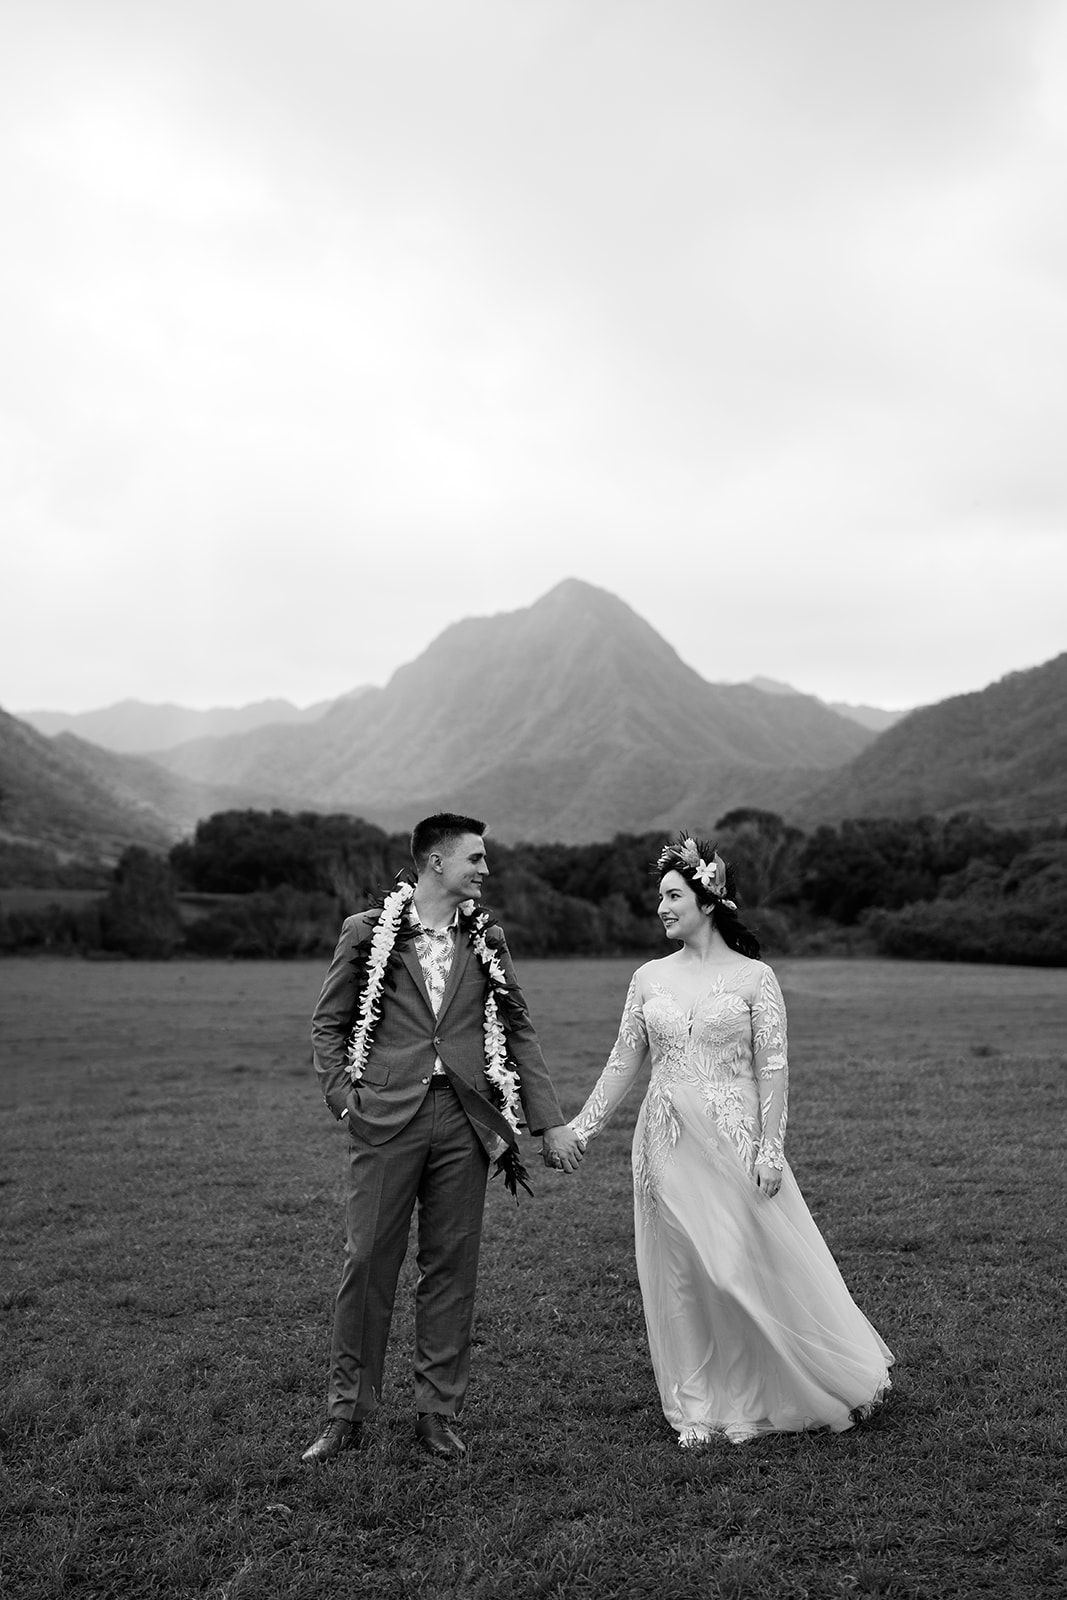 A monochorome photo of the bride and groom standing in a field at Kualoa Ranch with mountains in the background.